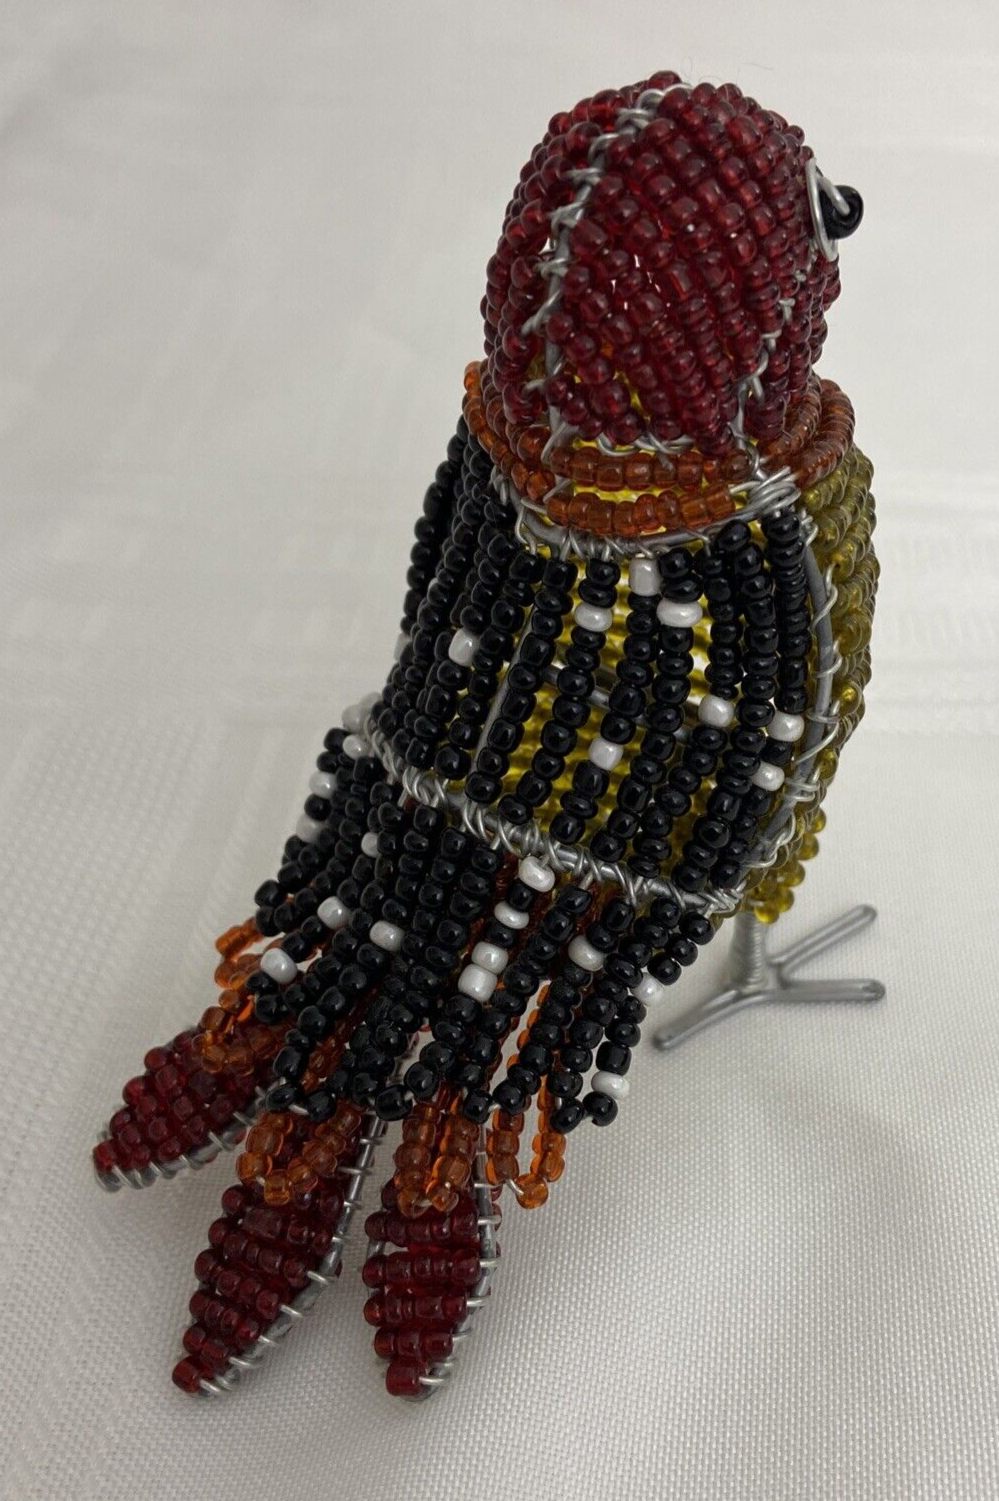 Handmade Beaded Bird Figurine On Wire African Folk Art Finch Statue Gift Idea - Flexi Africa - Flexi Africa offers Free Delivery Worldwide - Vibrant African traditional clothing showcasing bold prints and intricate designs